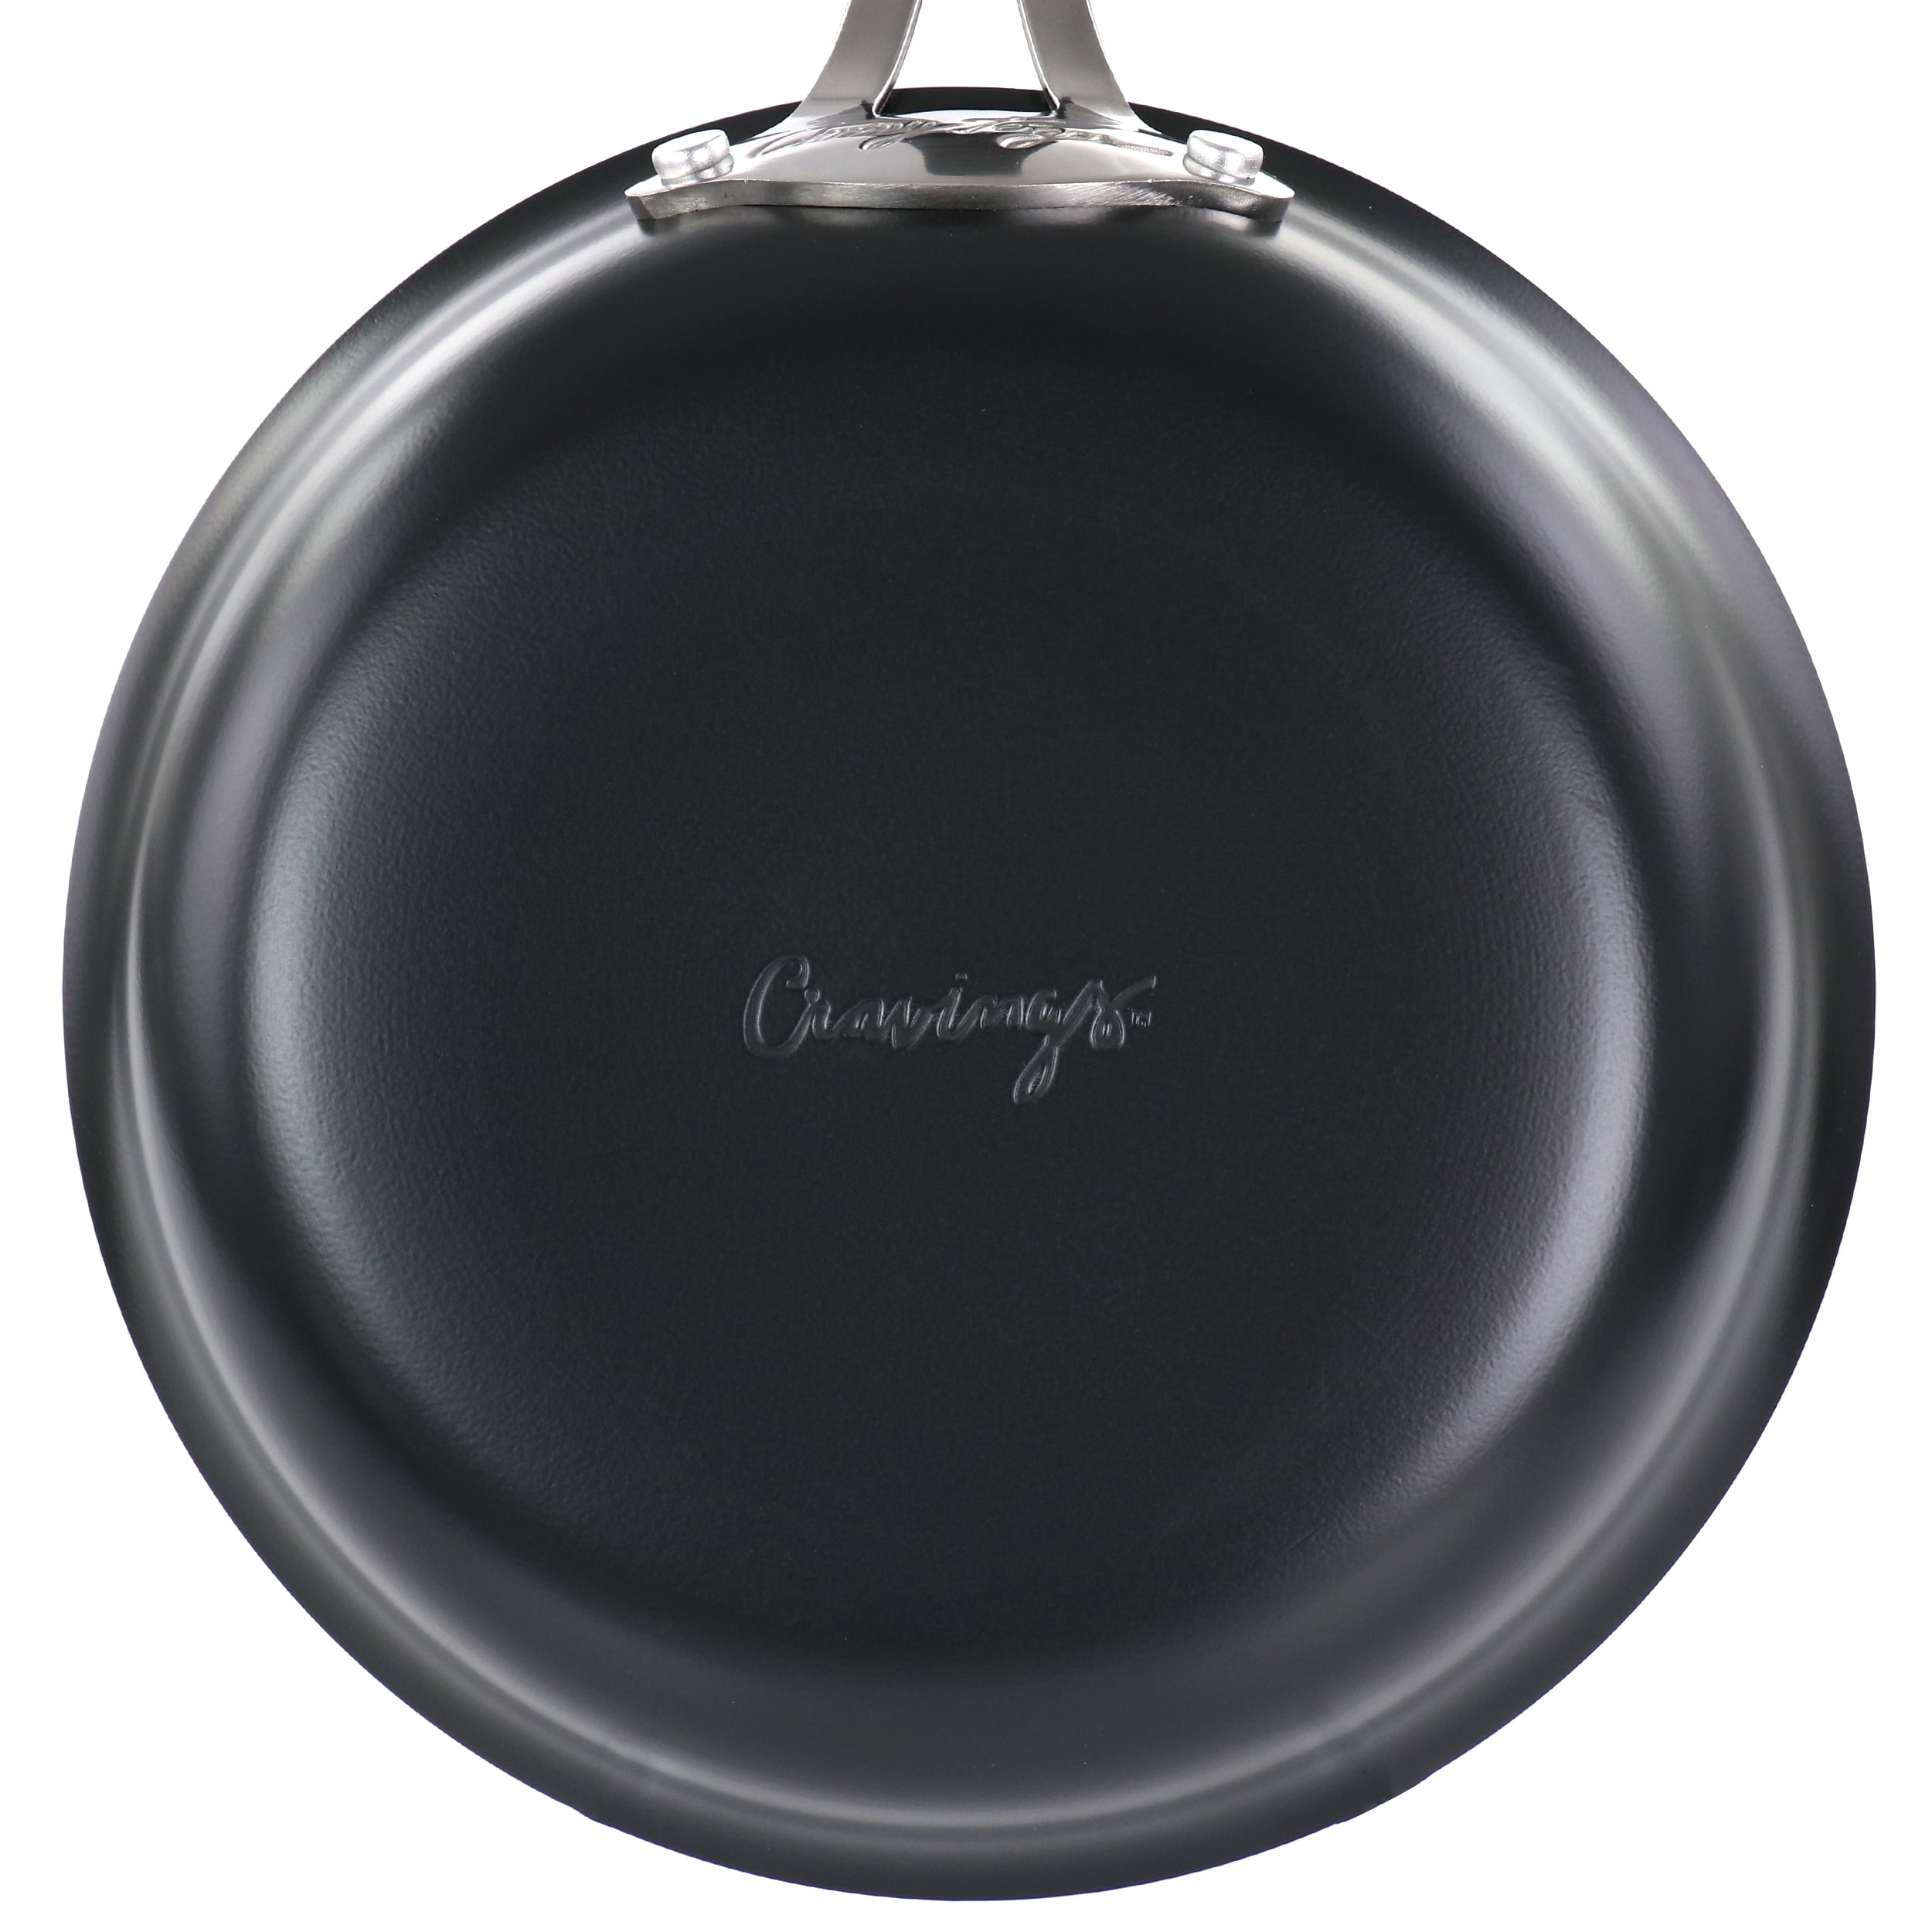 Cravings by Chrissy Teigen Enamel Coated Cookware Review